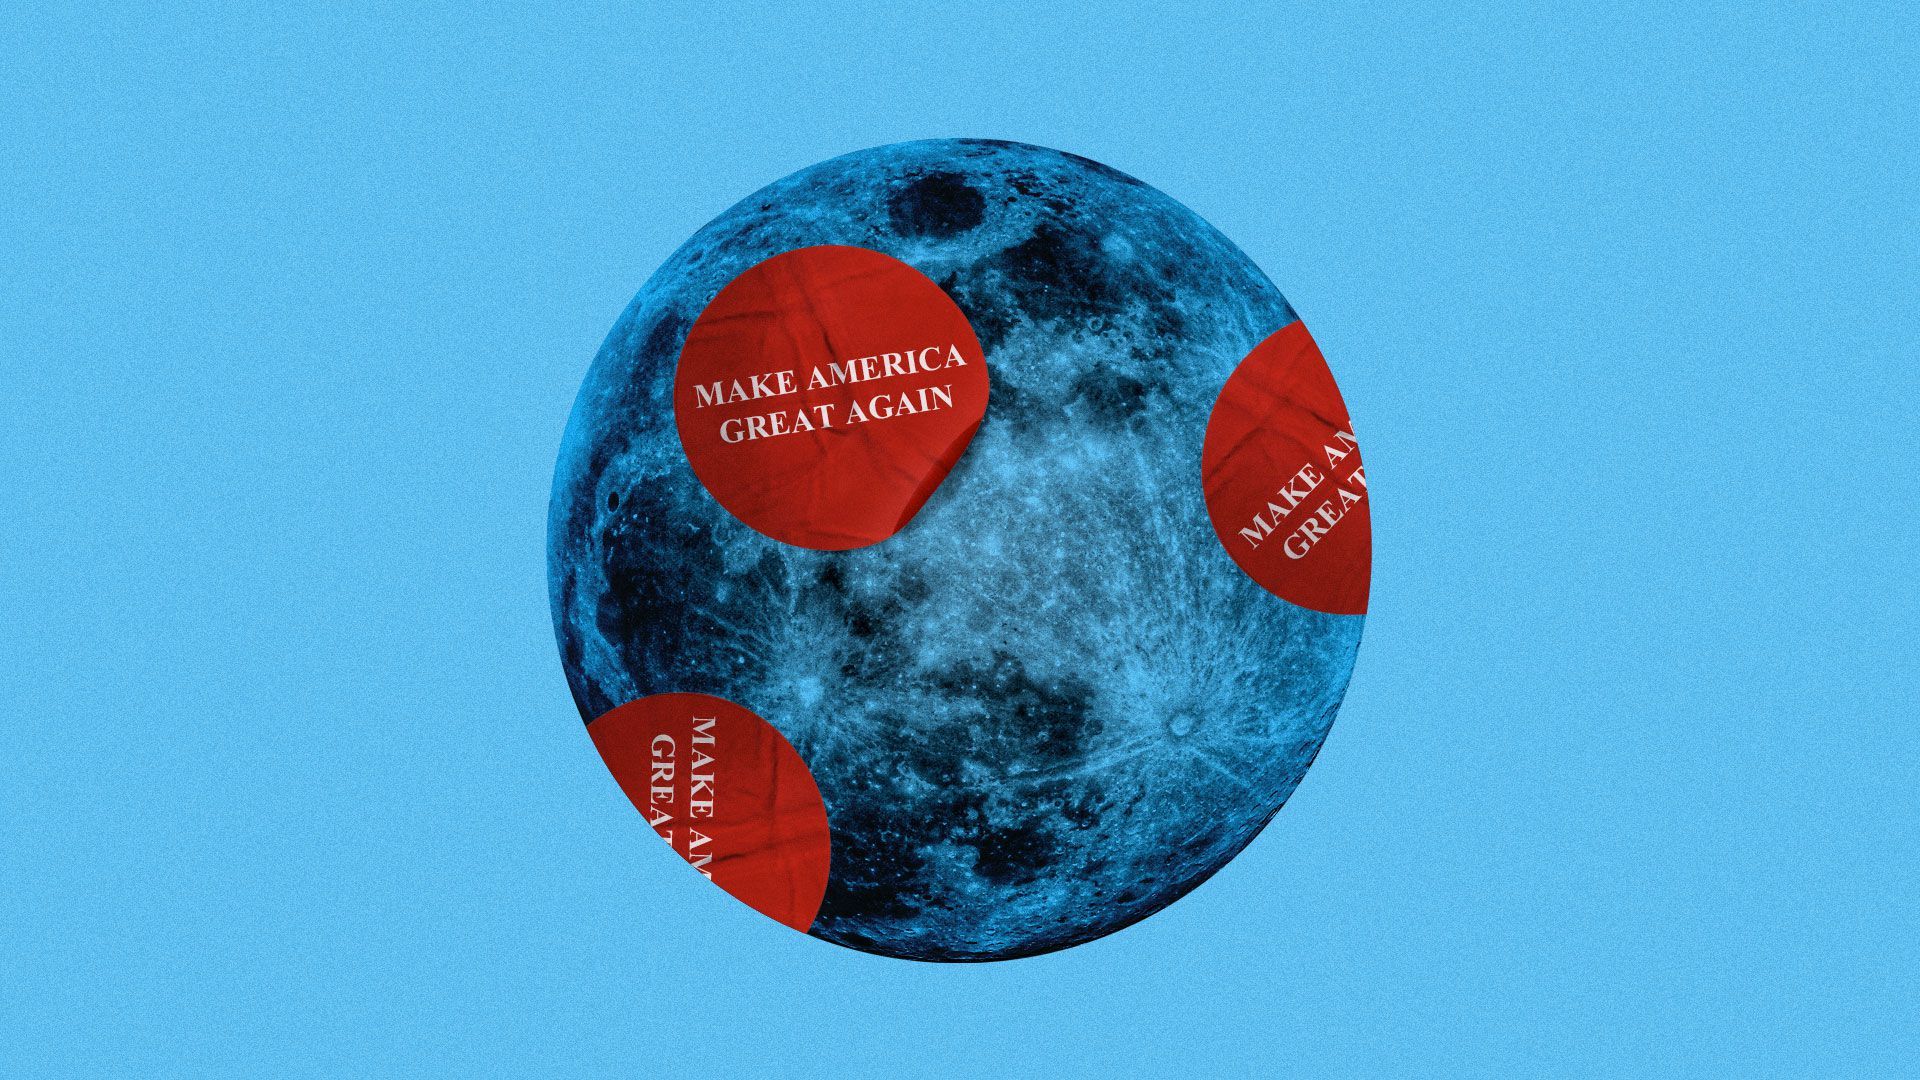 Illustration of The Moon with Make America Great Stickers “MAGA”